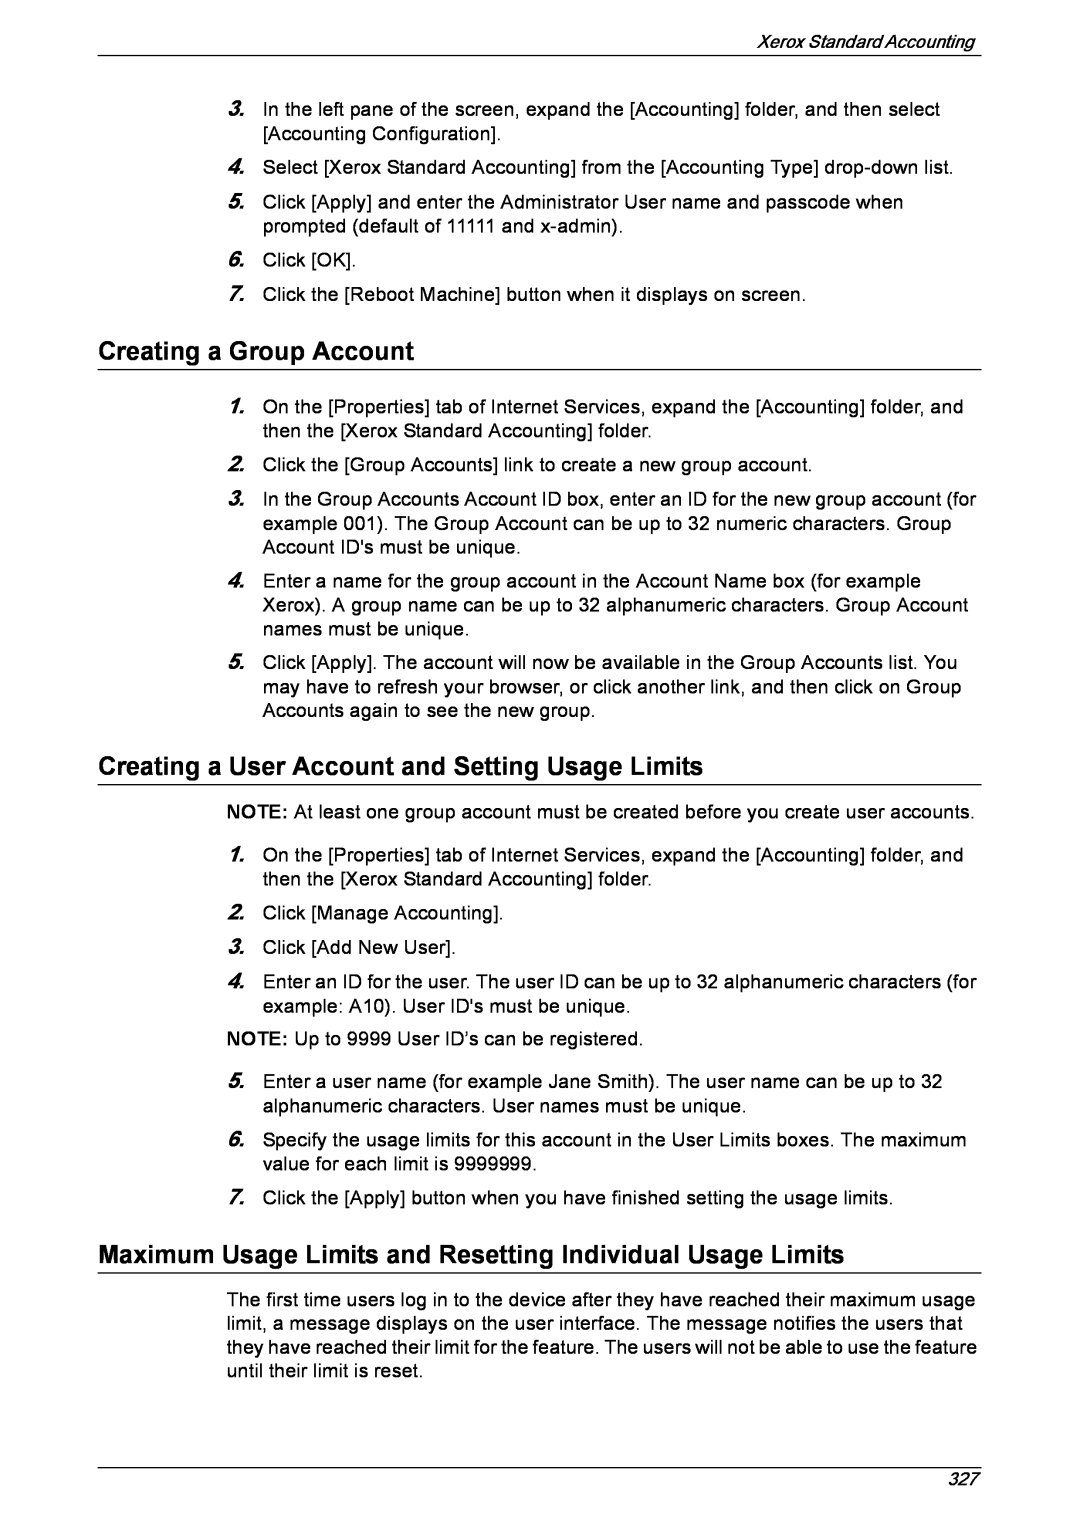 Xerox 5222 manual Creating a Group Account, Creating a User Account and Setting Usage Limits 